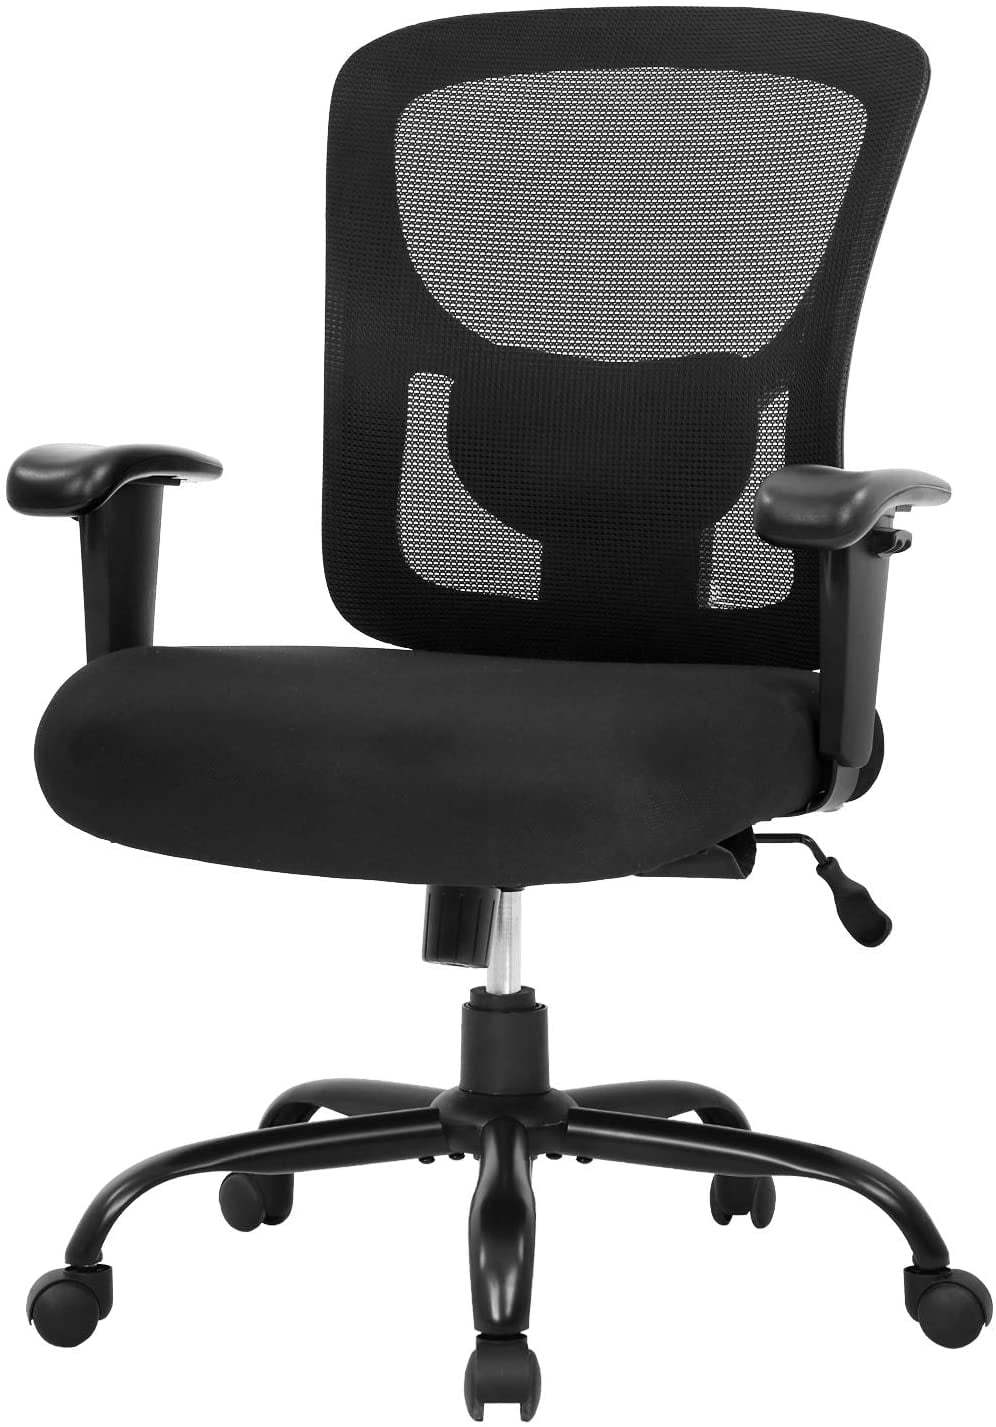 Posture Chair Work Task Office Swivel Adjustable Height Lumbar Support Grey New 